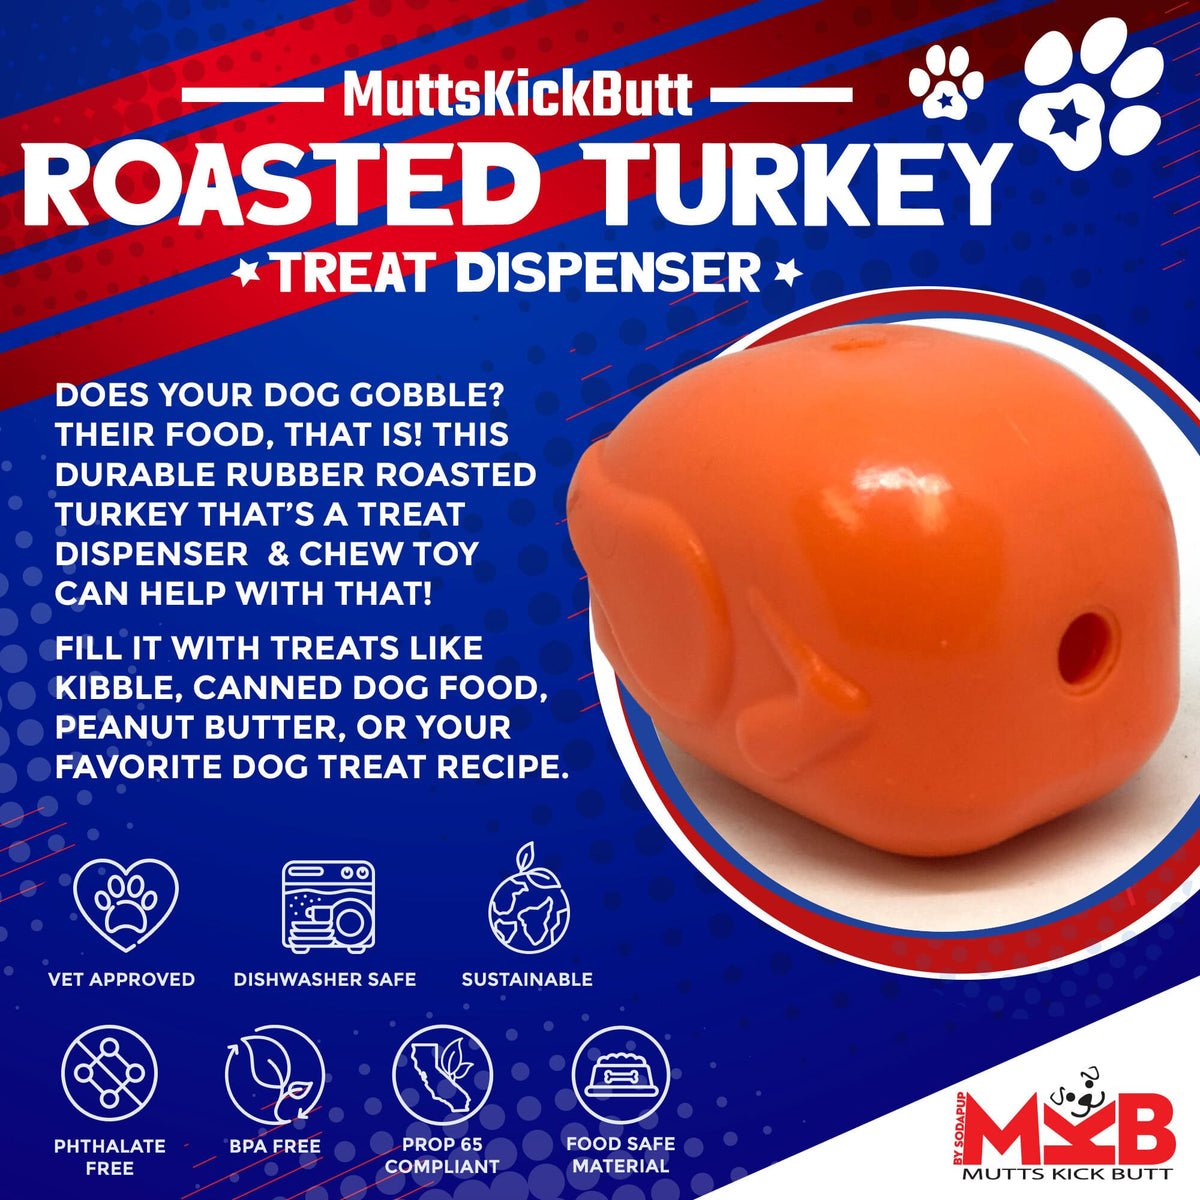 Roasted Turkey Durable Rubber Dog Toy - Made in the USA